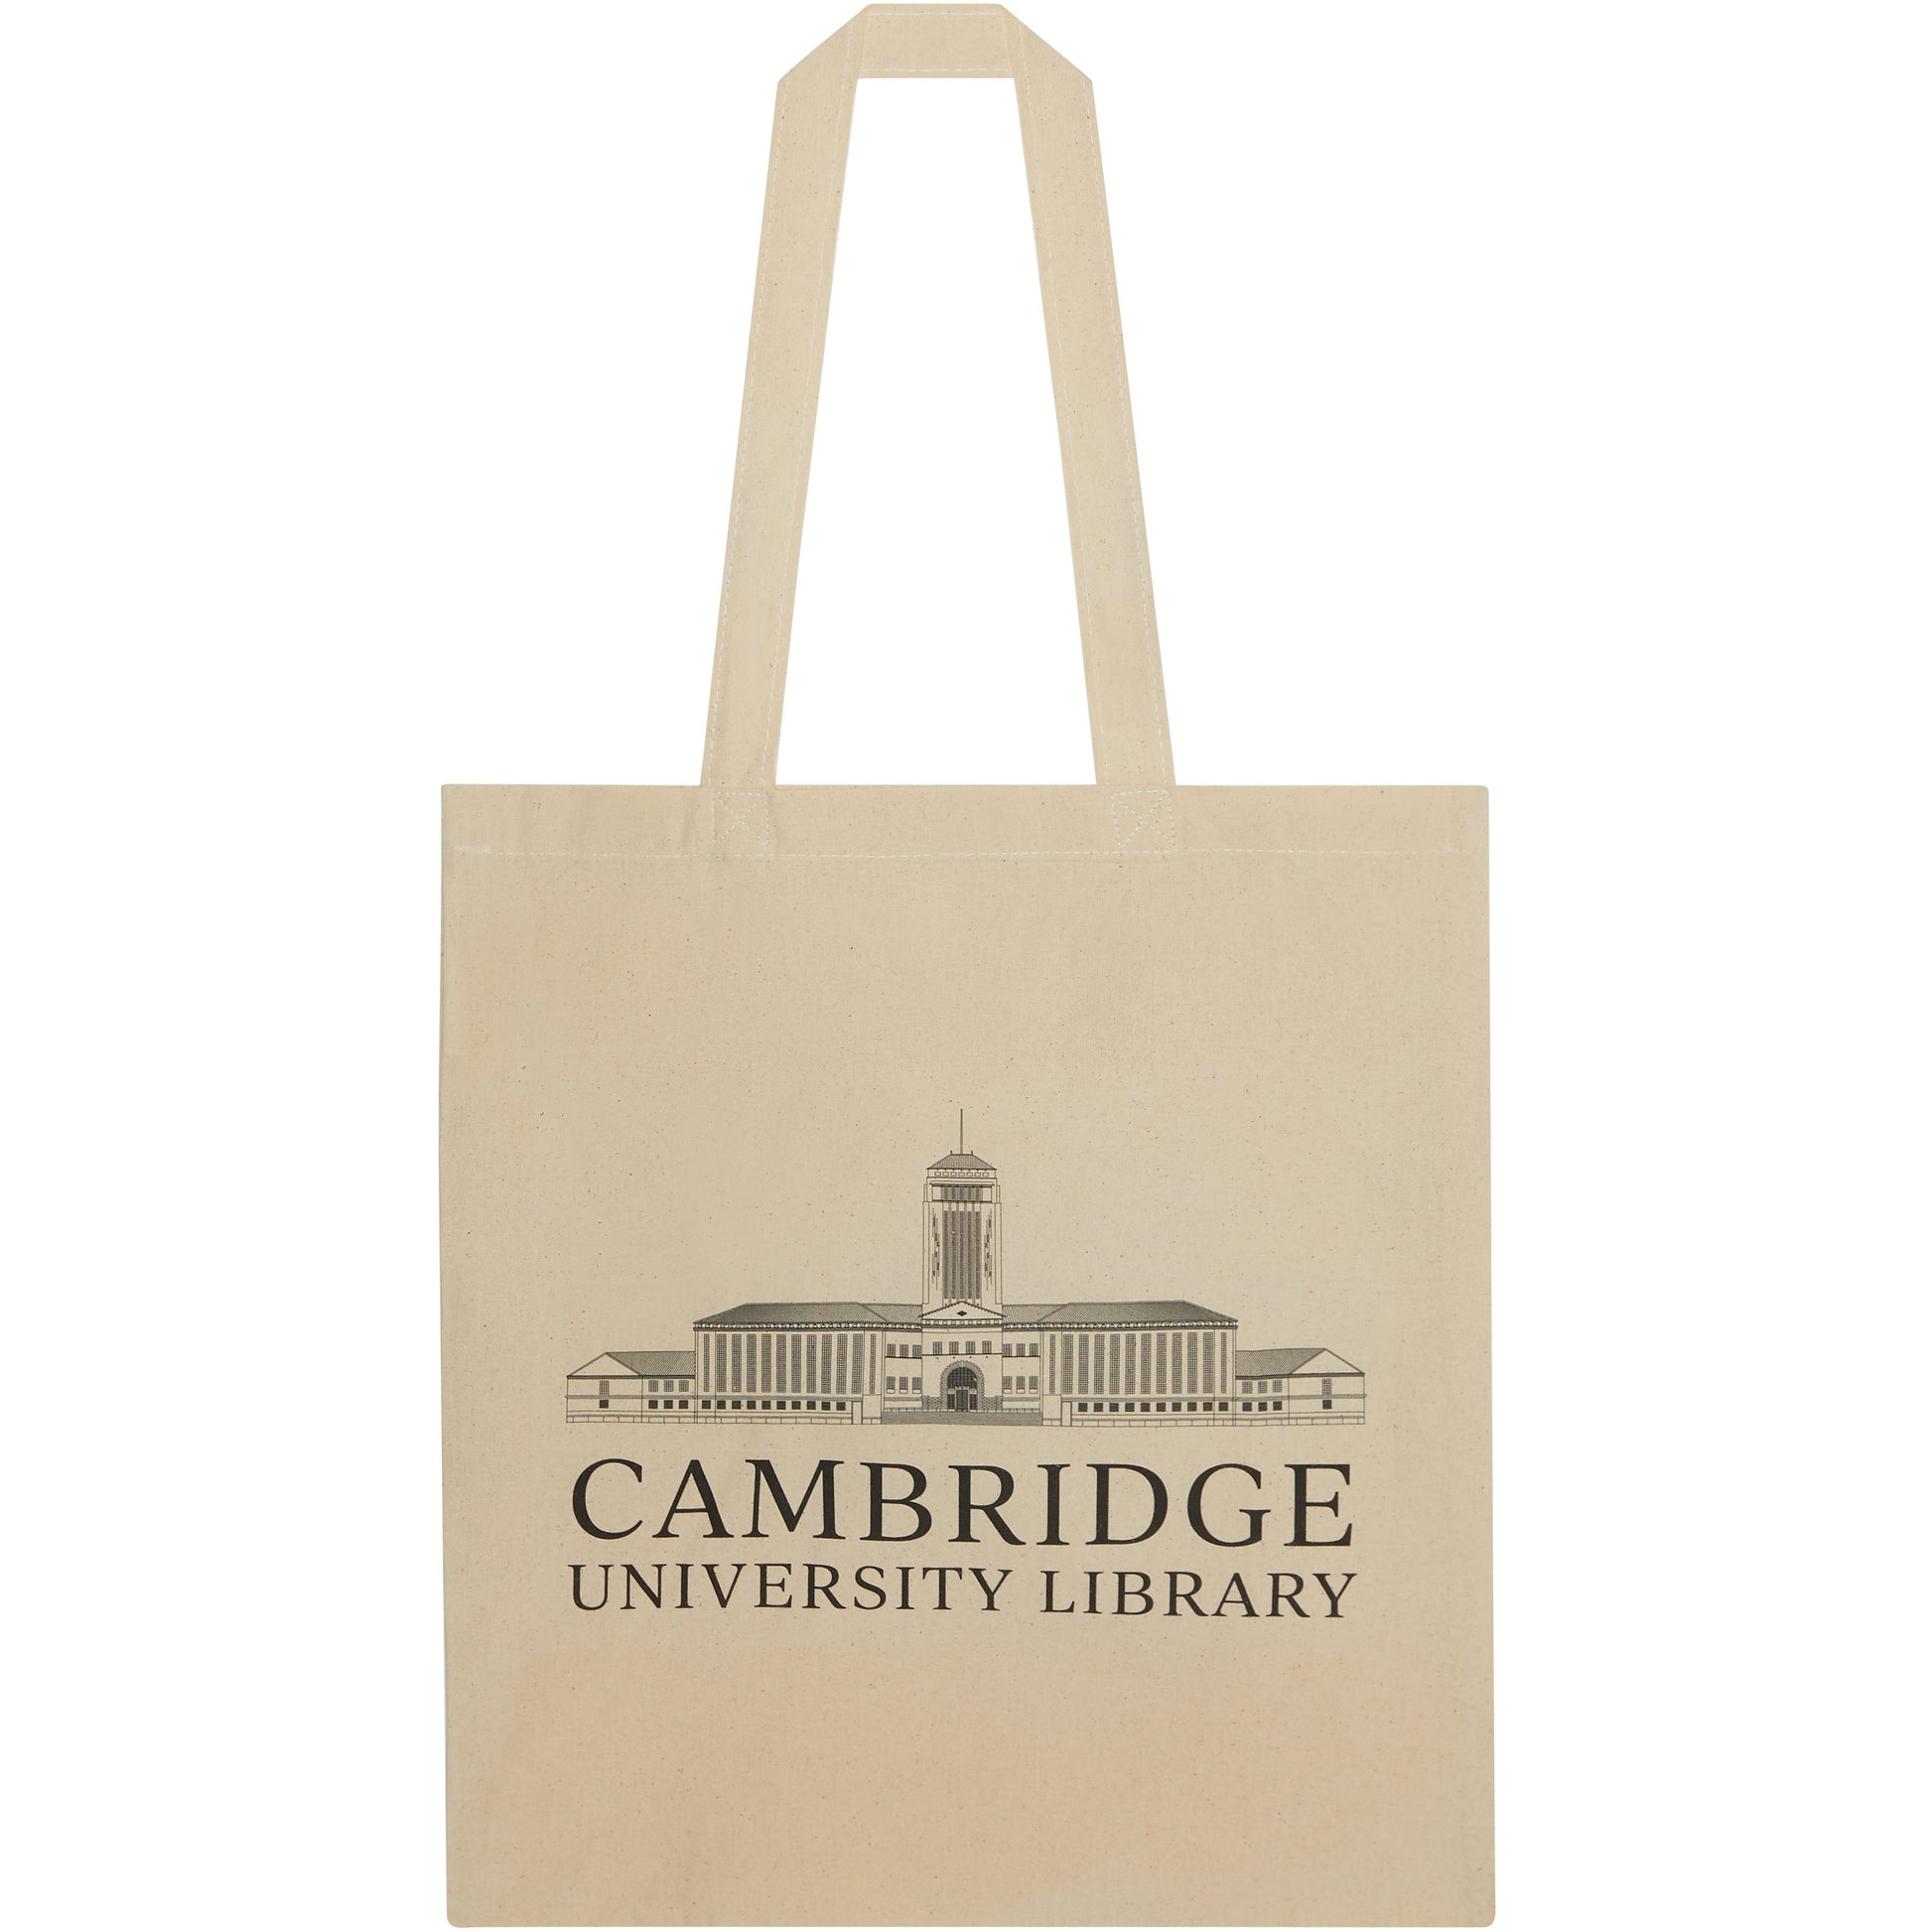 Natural colour cotton tote bag with Cambridge University Library lettering and architectural illustration of the building. Brought to you by CuratingCambridge.com